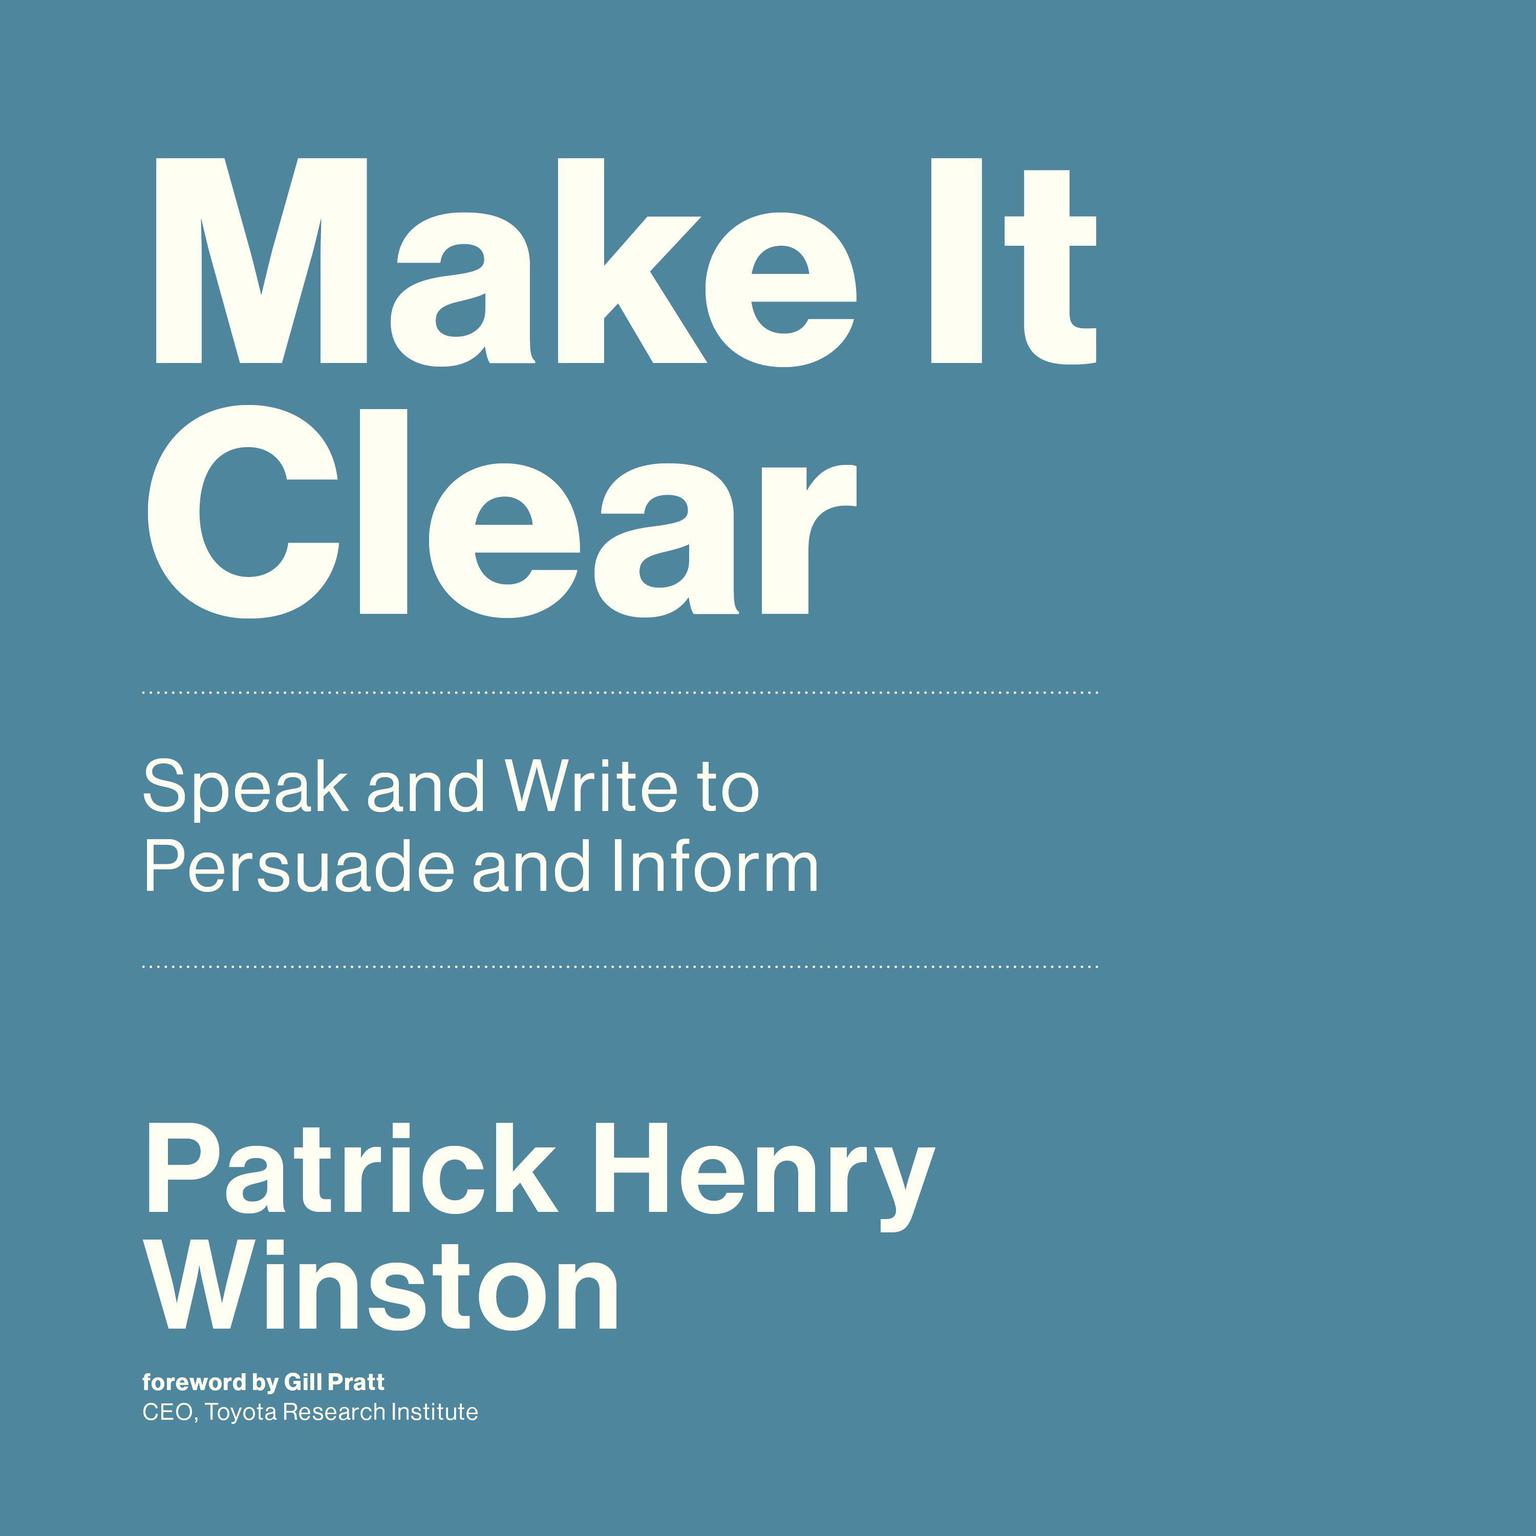 Make It Clear: Speak and Write to Persuade and Inform Audiobook, by Patrick Henry Winston